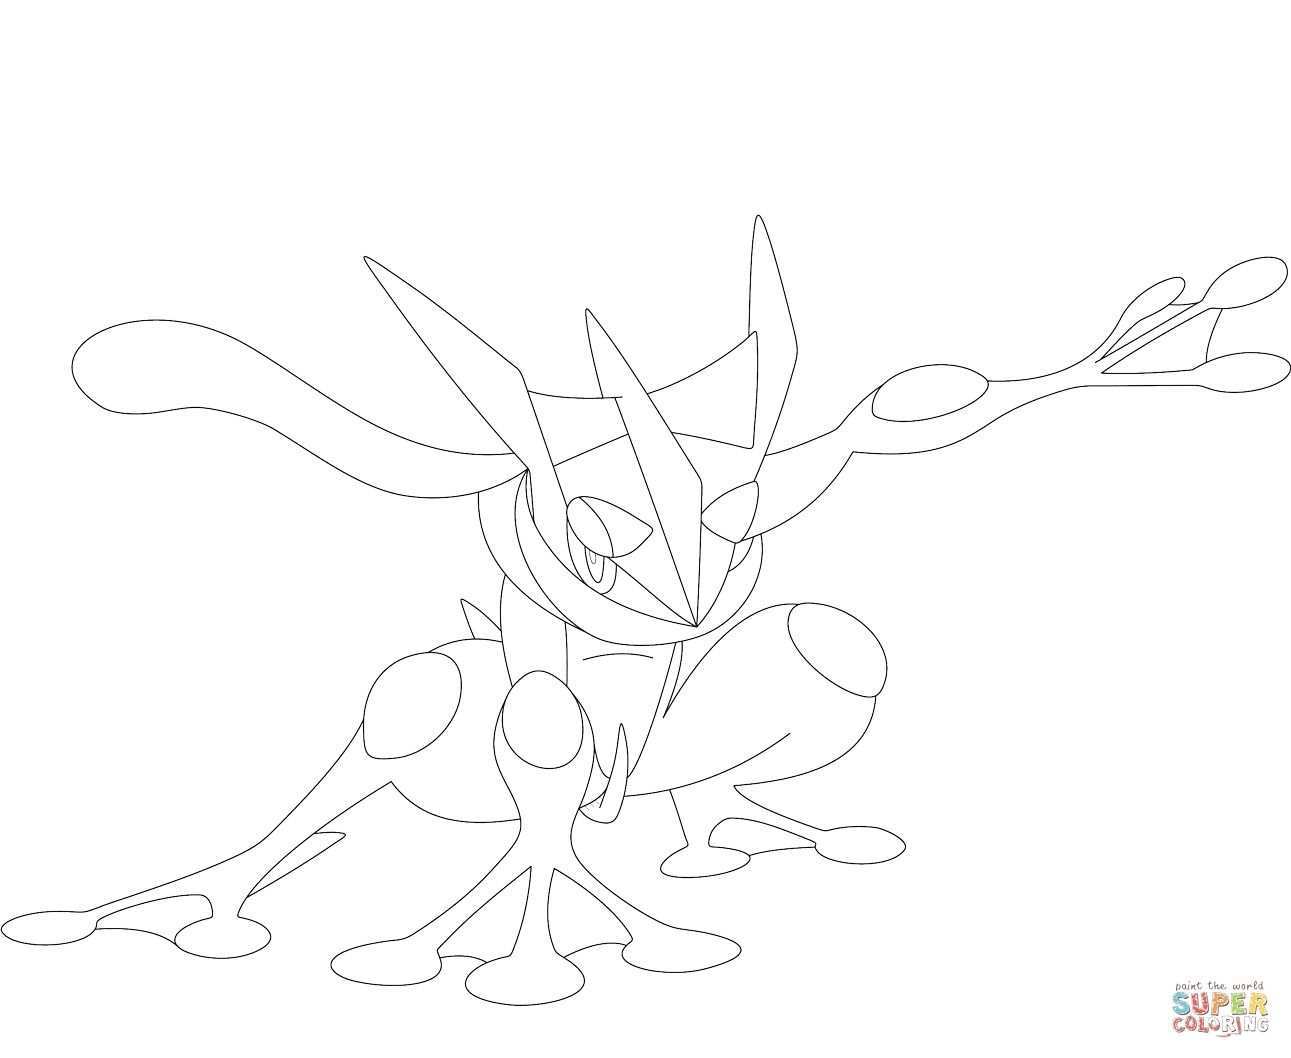 Greninja Pokemon Coloring Page Coloring Pages Allow Kids To Accompany Their Favorite